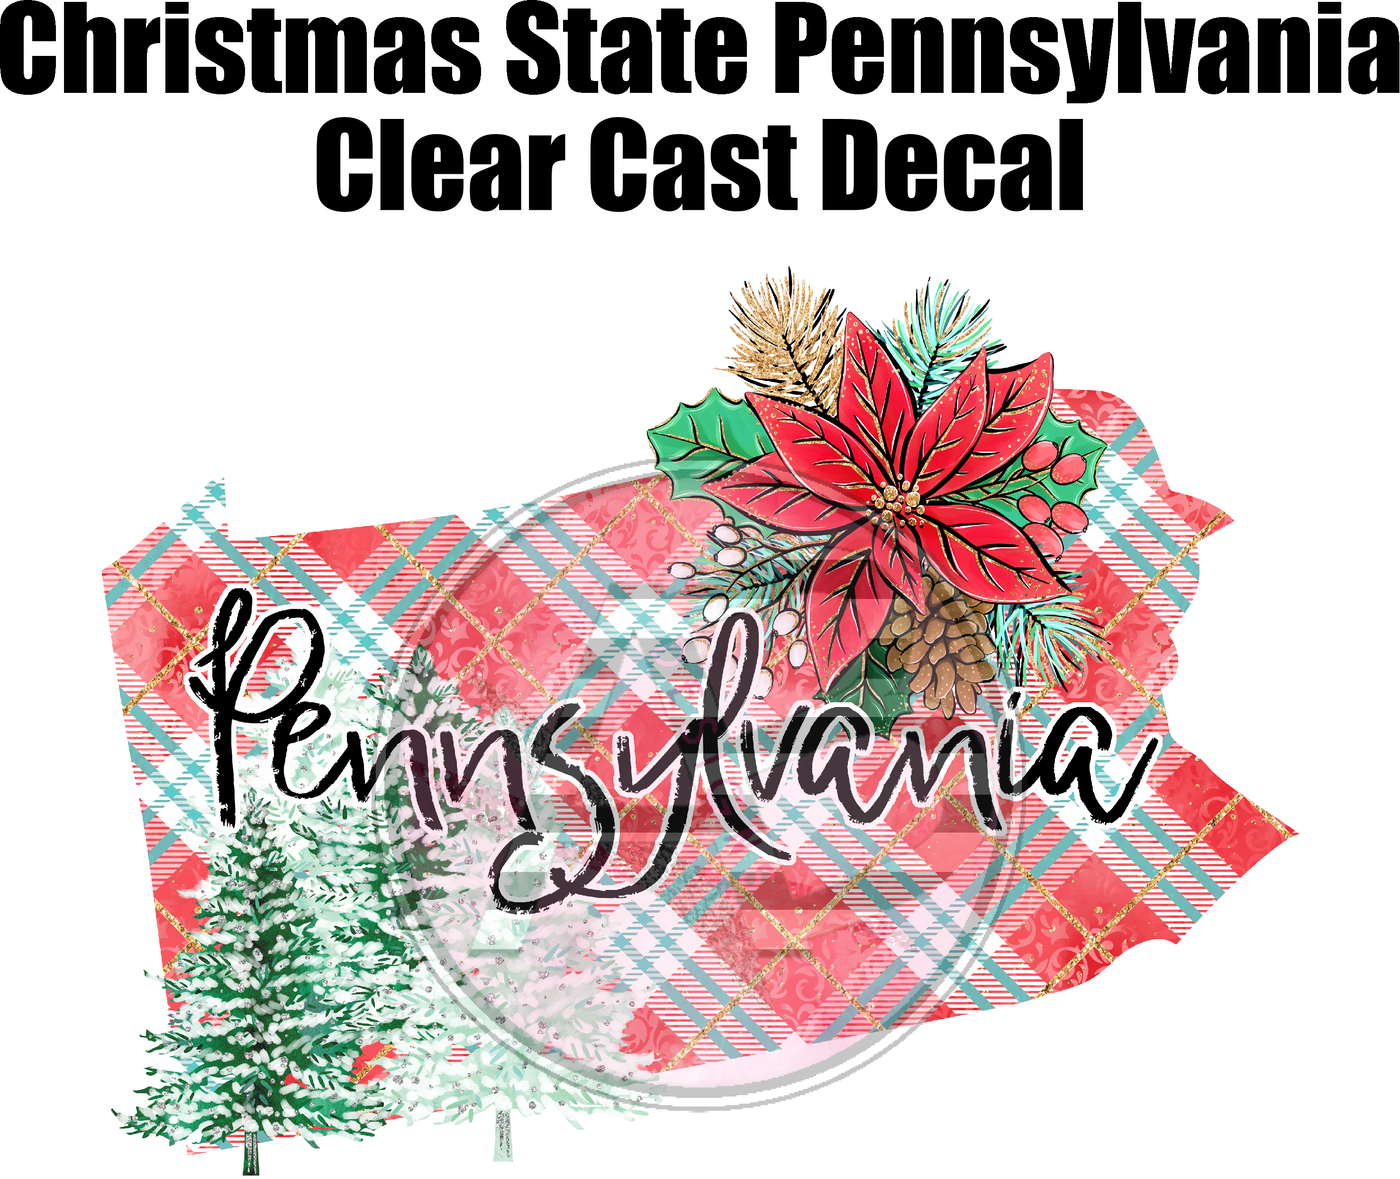 Christmas State Pennsylvania - Clear Cast Decal